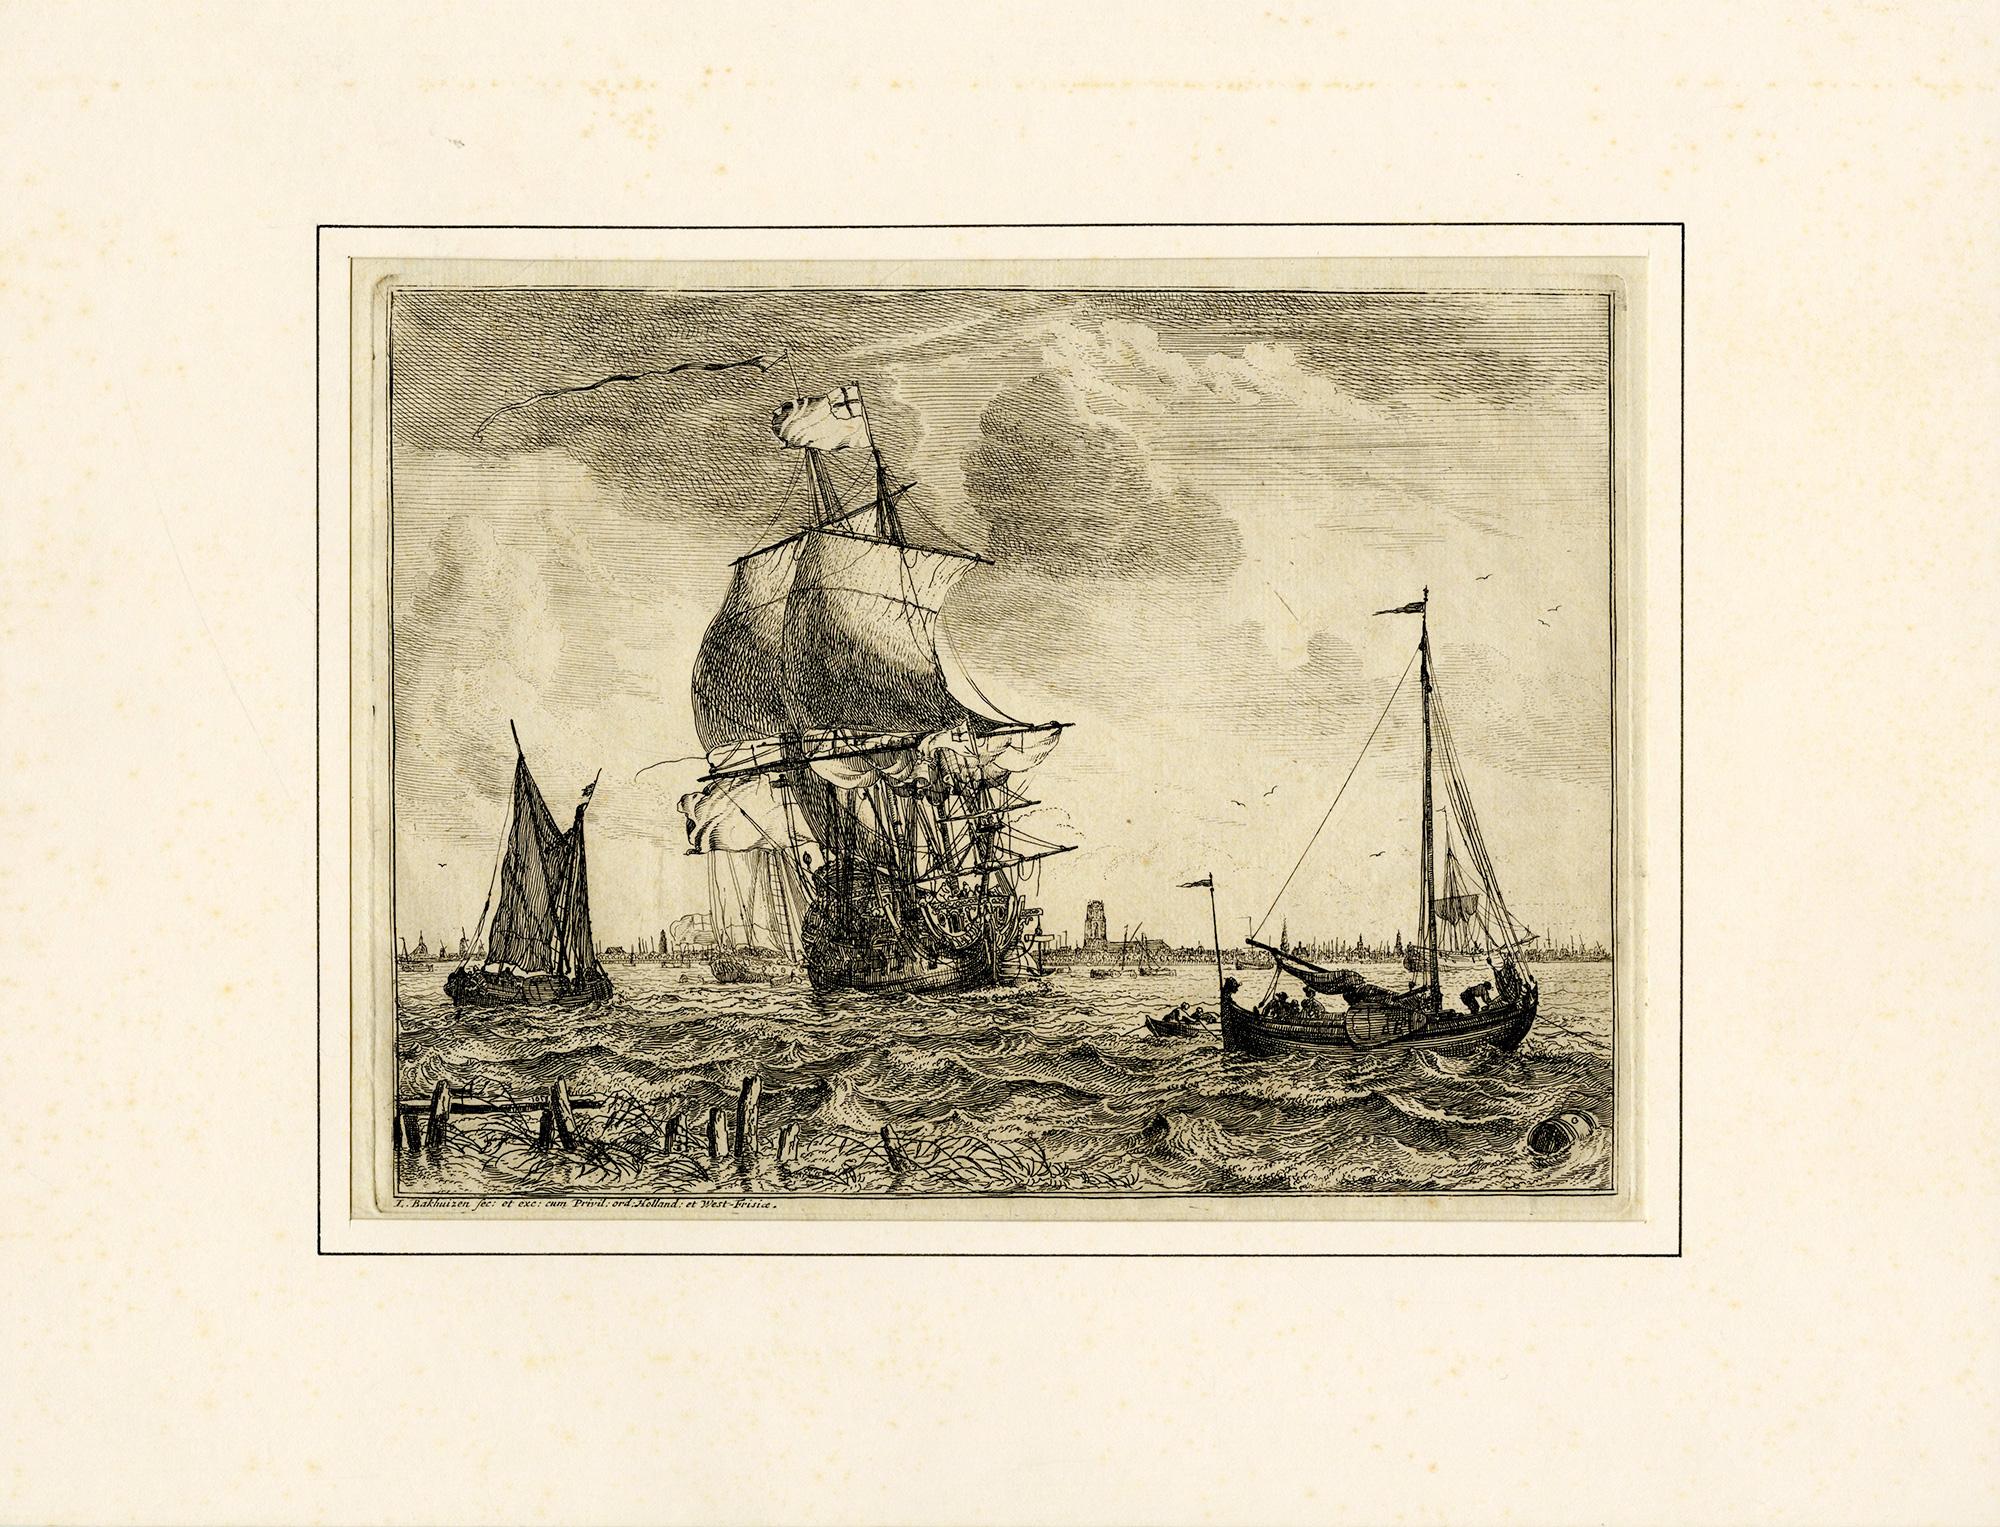 Shipping on the Maas, Rotterdam in the background. - Print by Ludolf Backhuizen